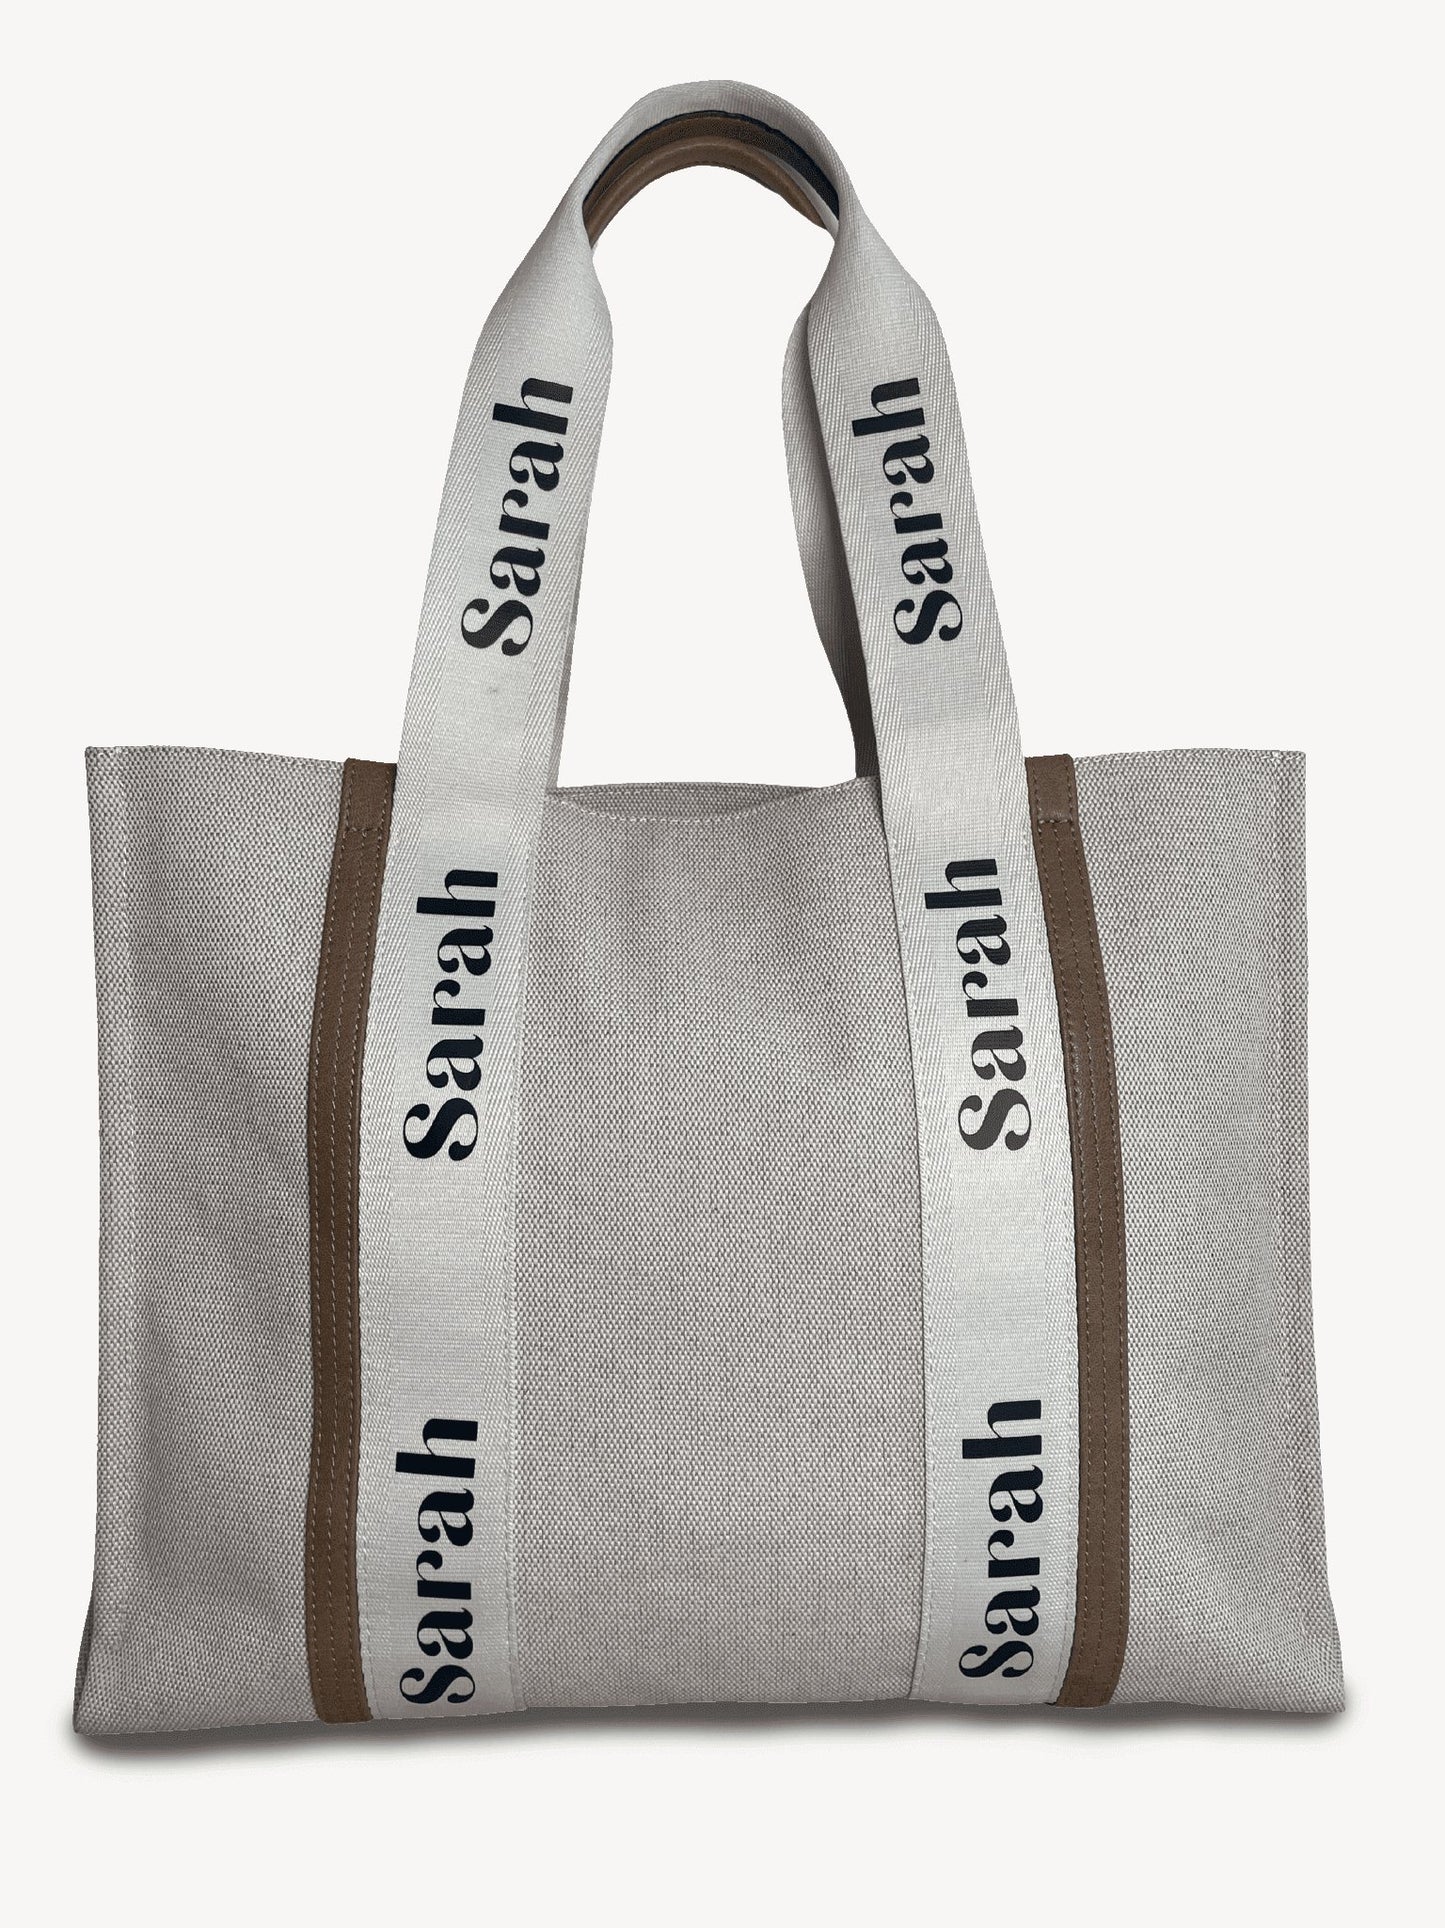 Luxury personalised canvas tote bag, cream and brown, with spacious storage and zip compartment